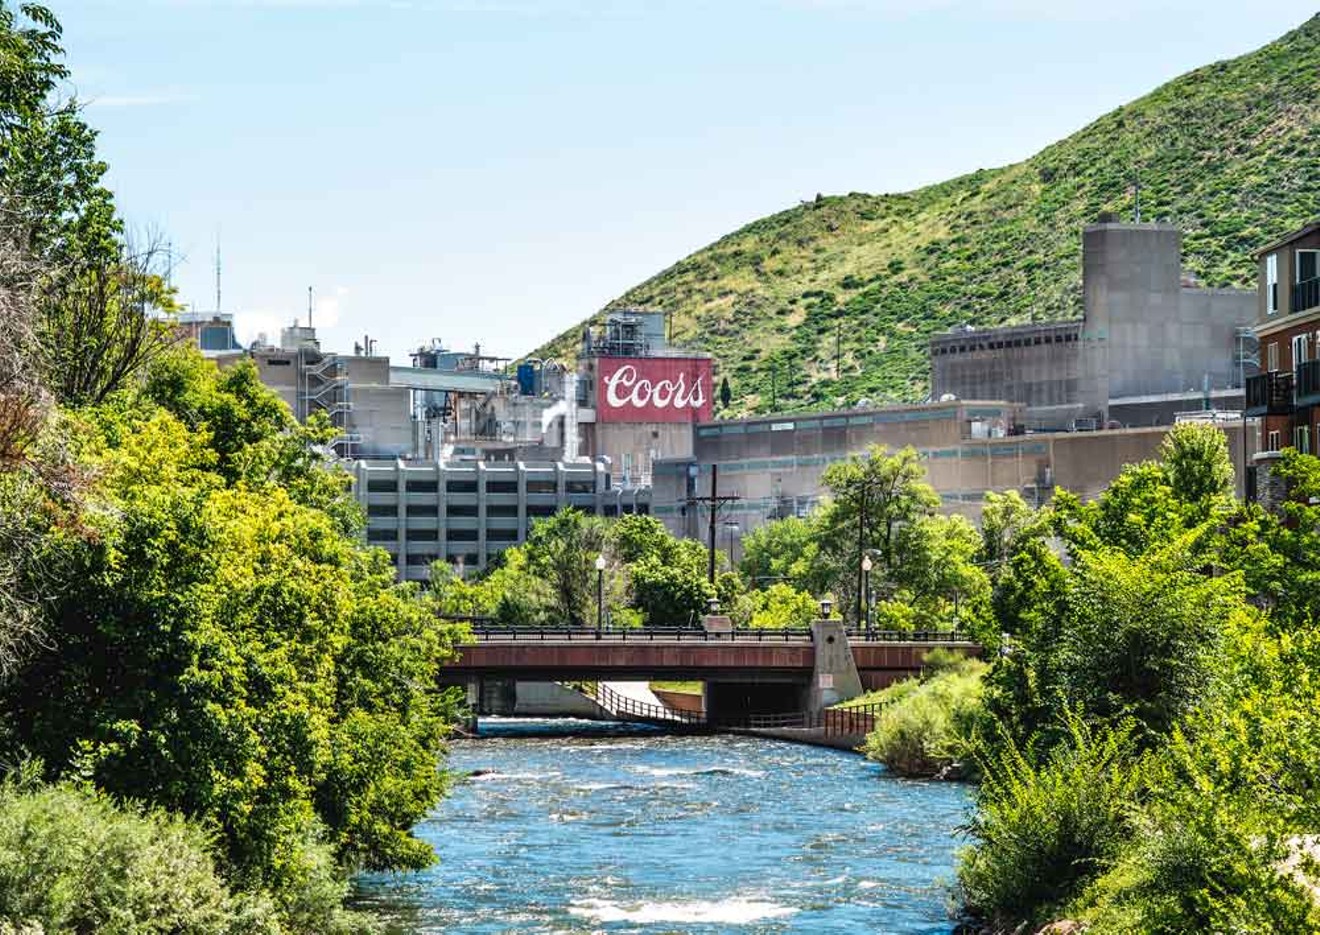 The Coors plant in Golden.